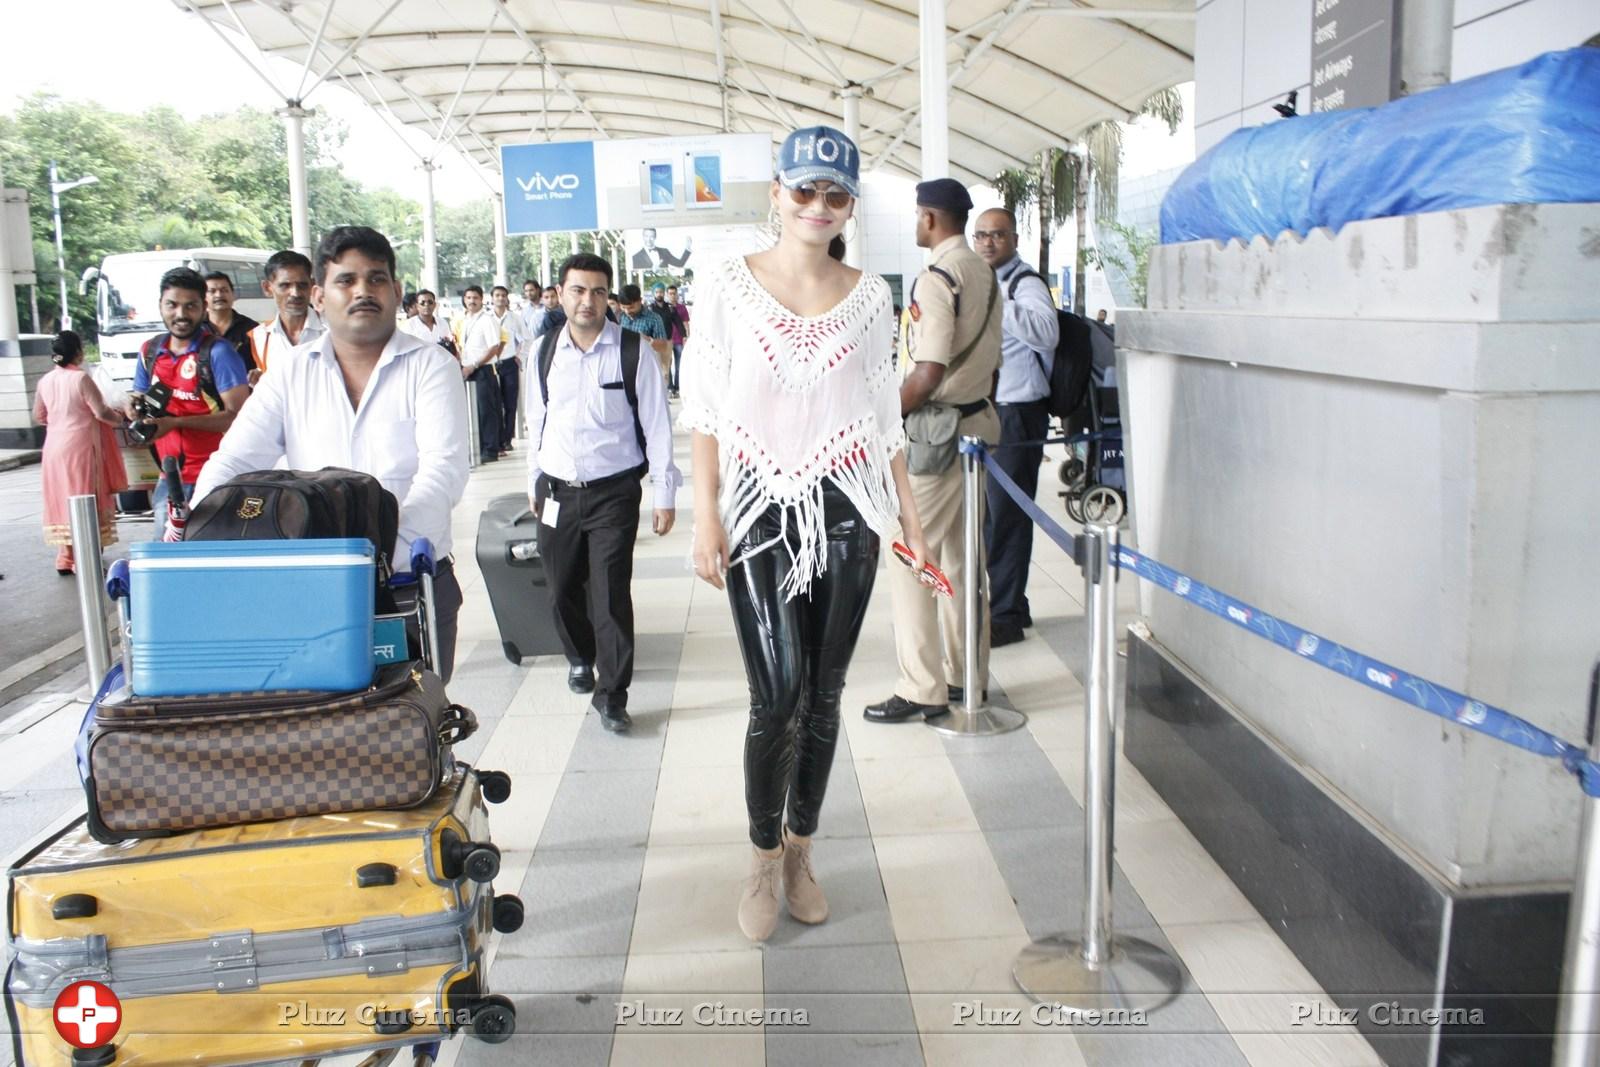 Spotted Urvashi Rautela On Airport Flying To Rajkot Photos | Picture 1079742